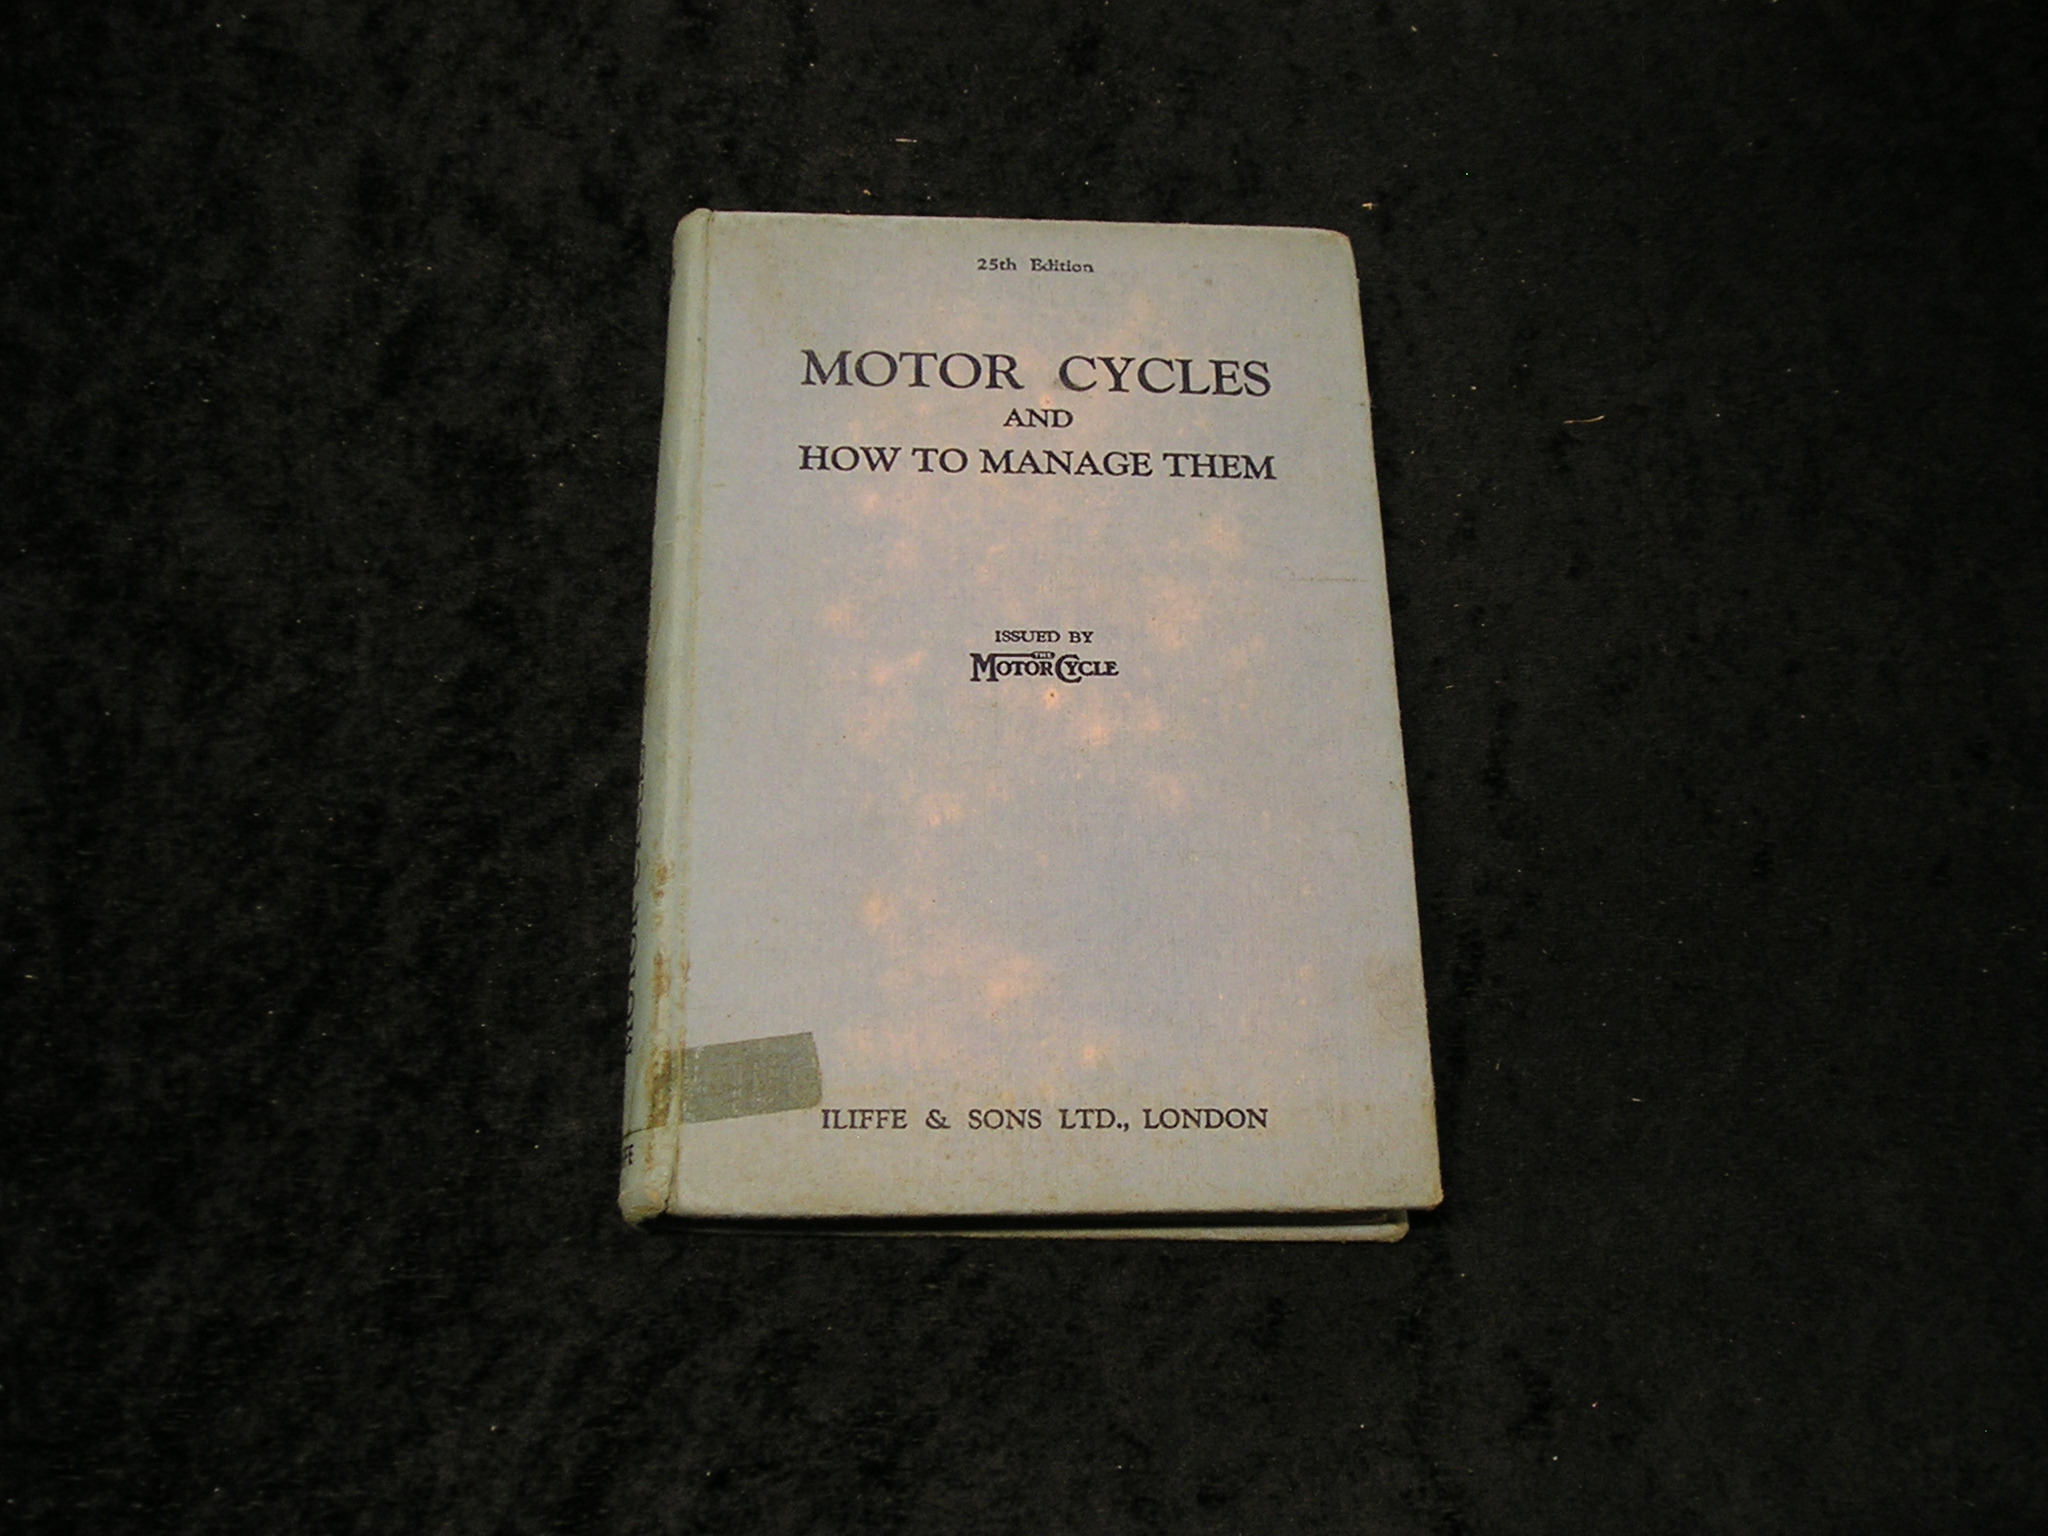 Motor Cycles and How to Manage Them